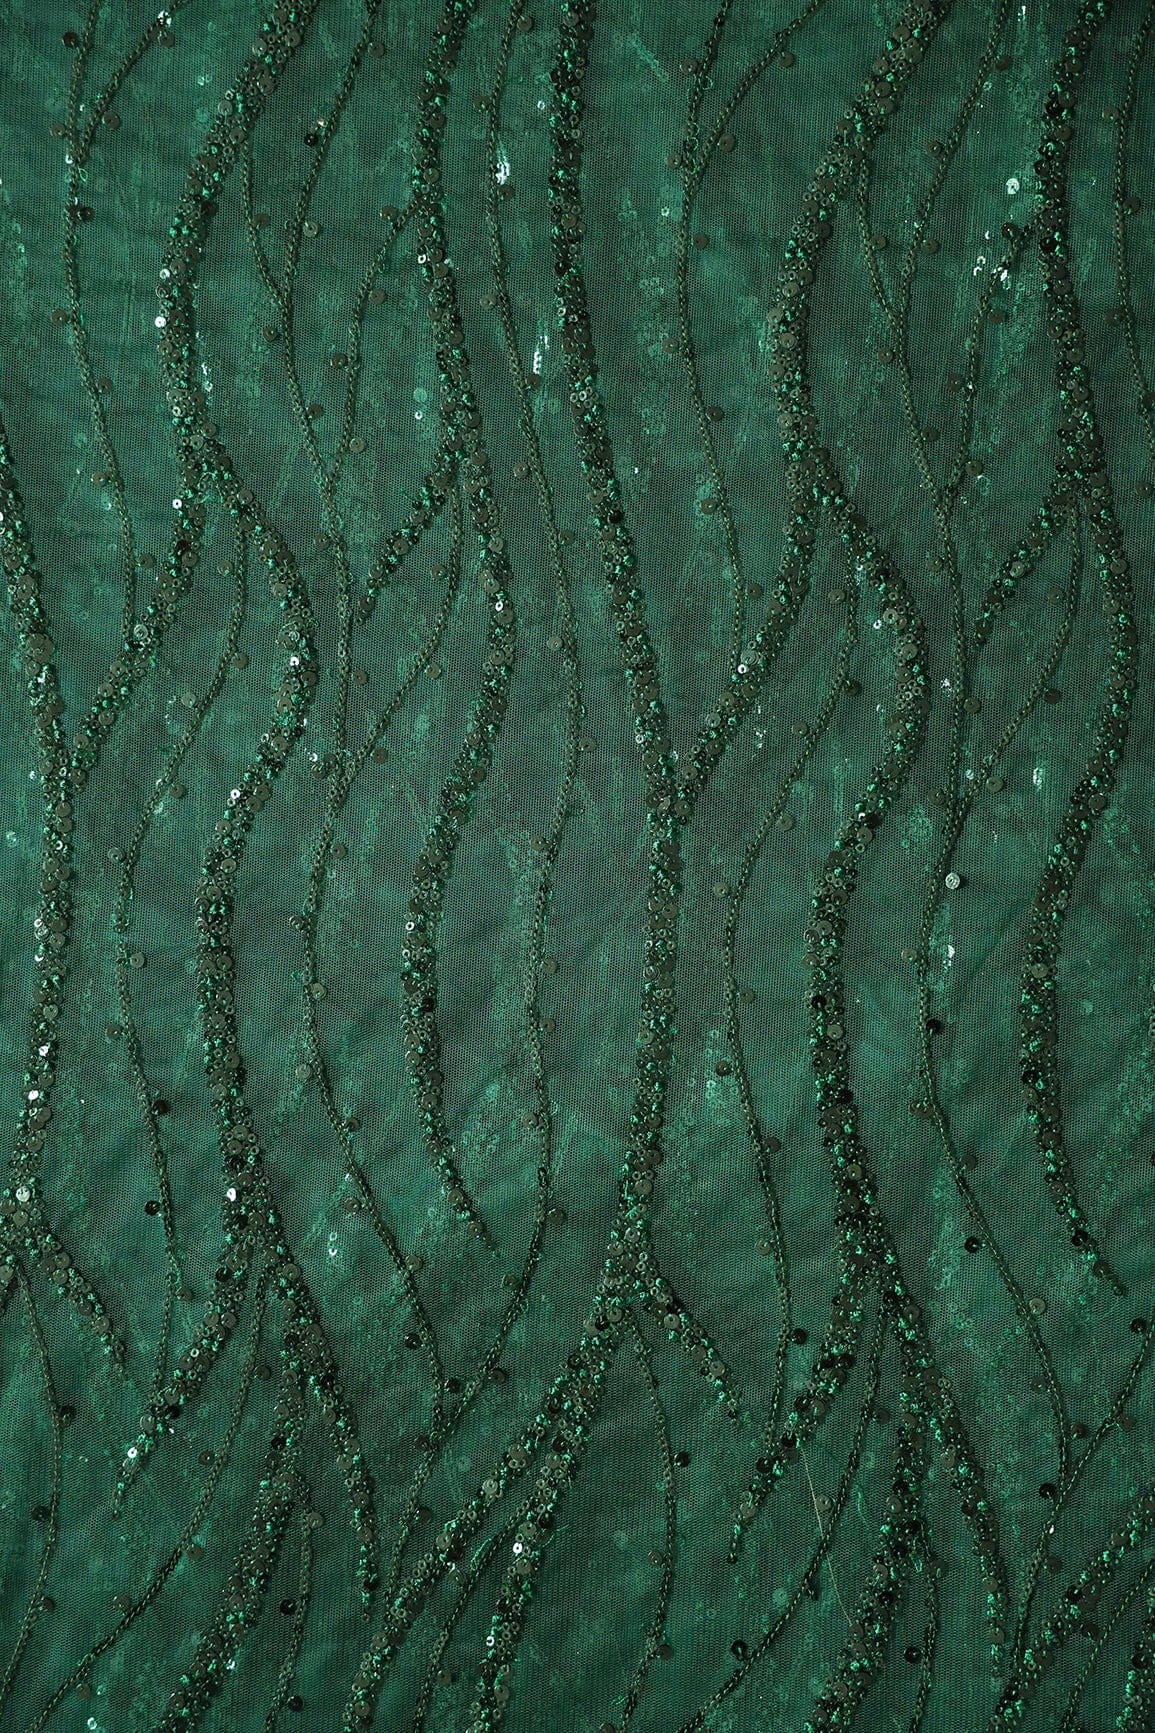 doeraa Embroidery Fabrics Beautiful Sequins With Green Thread Wavy Embroidery Work On Bottle Green Soft Net Fabric